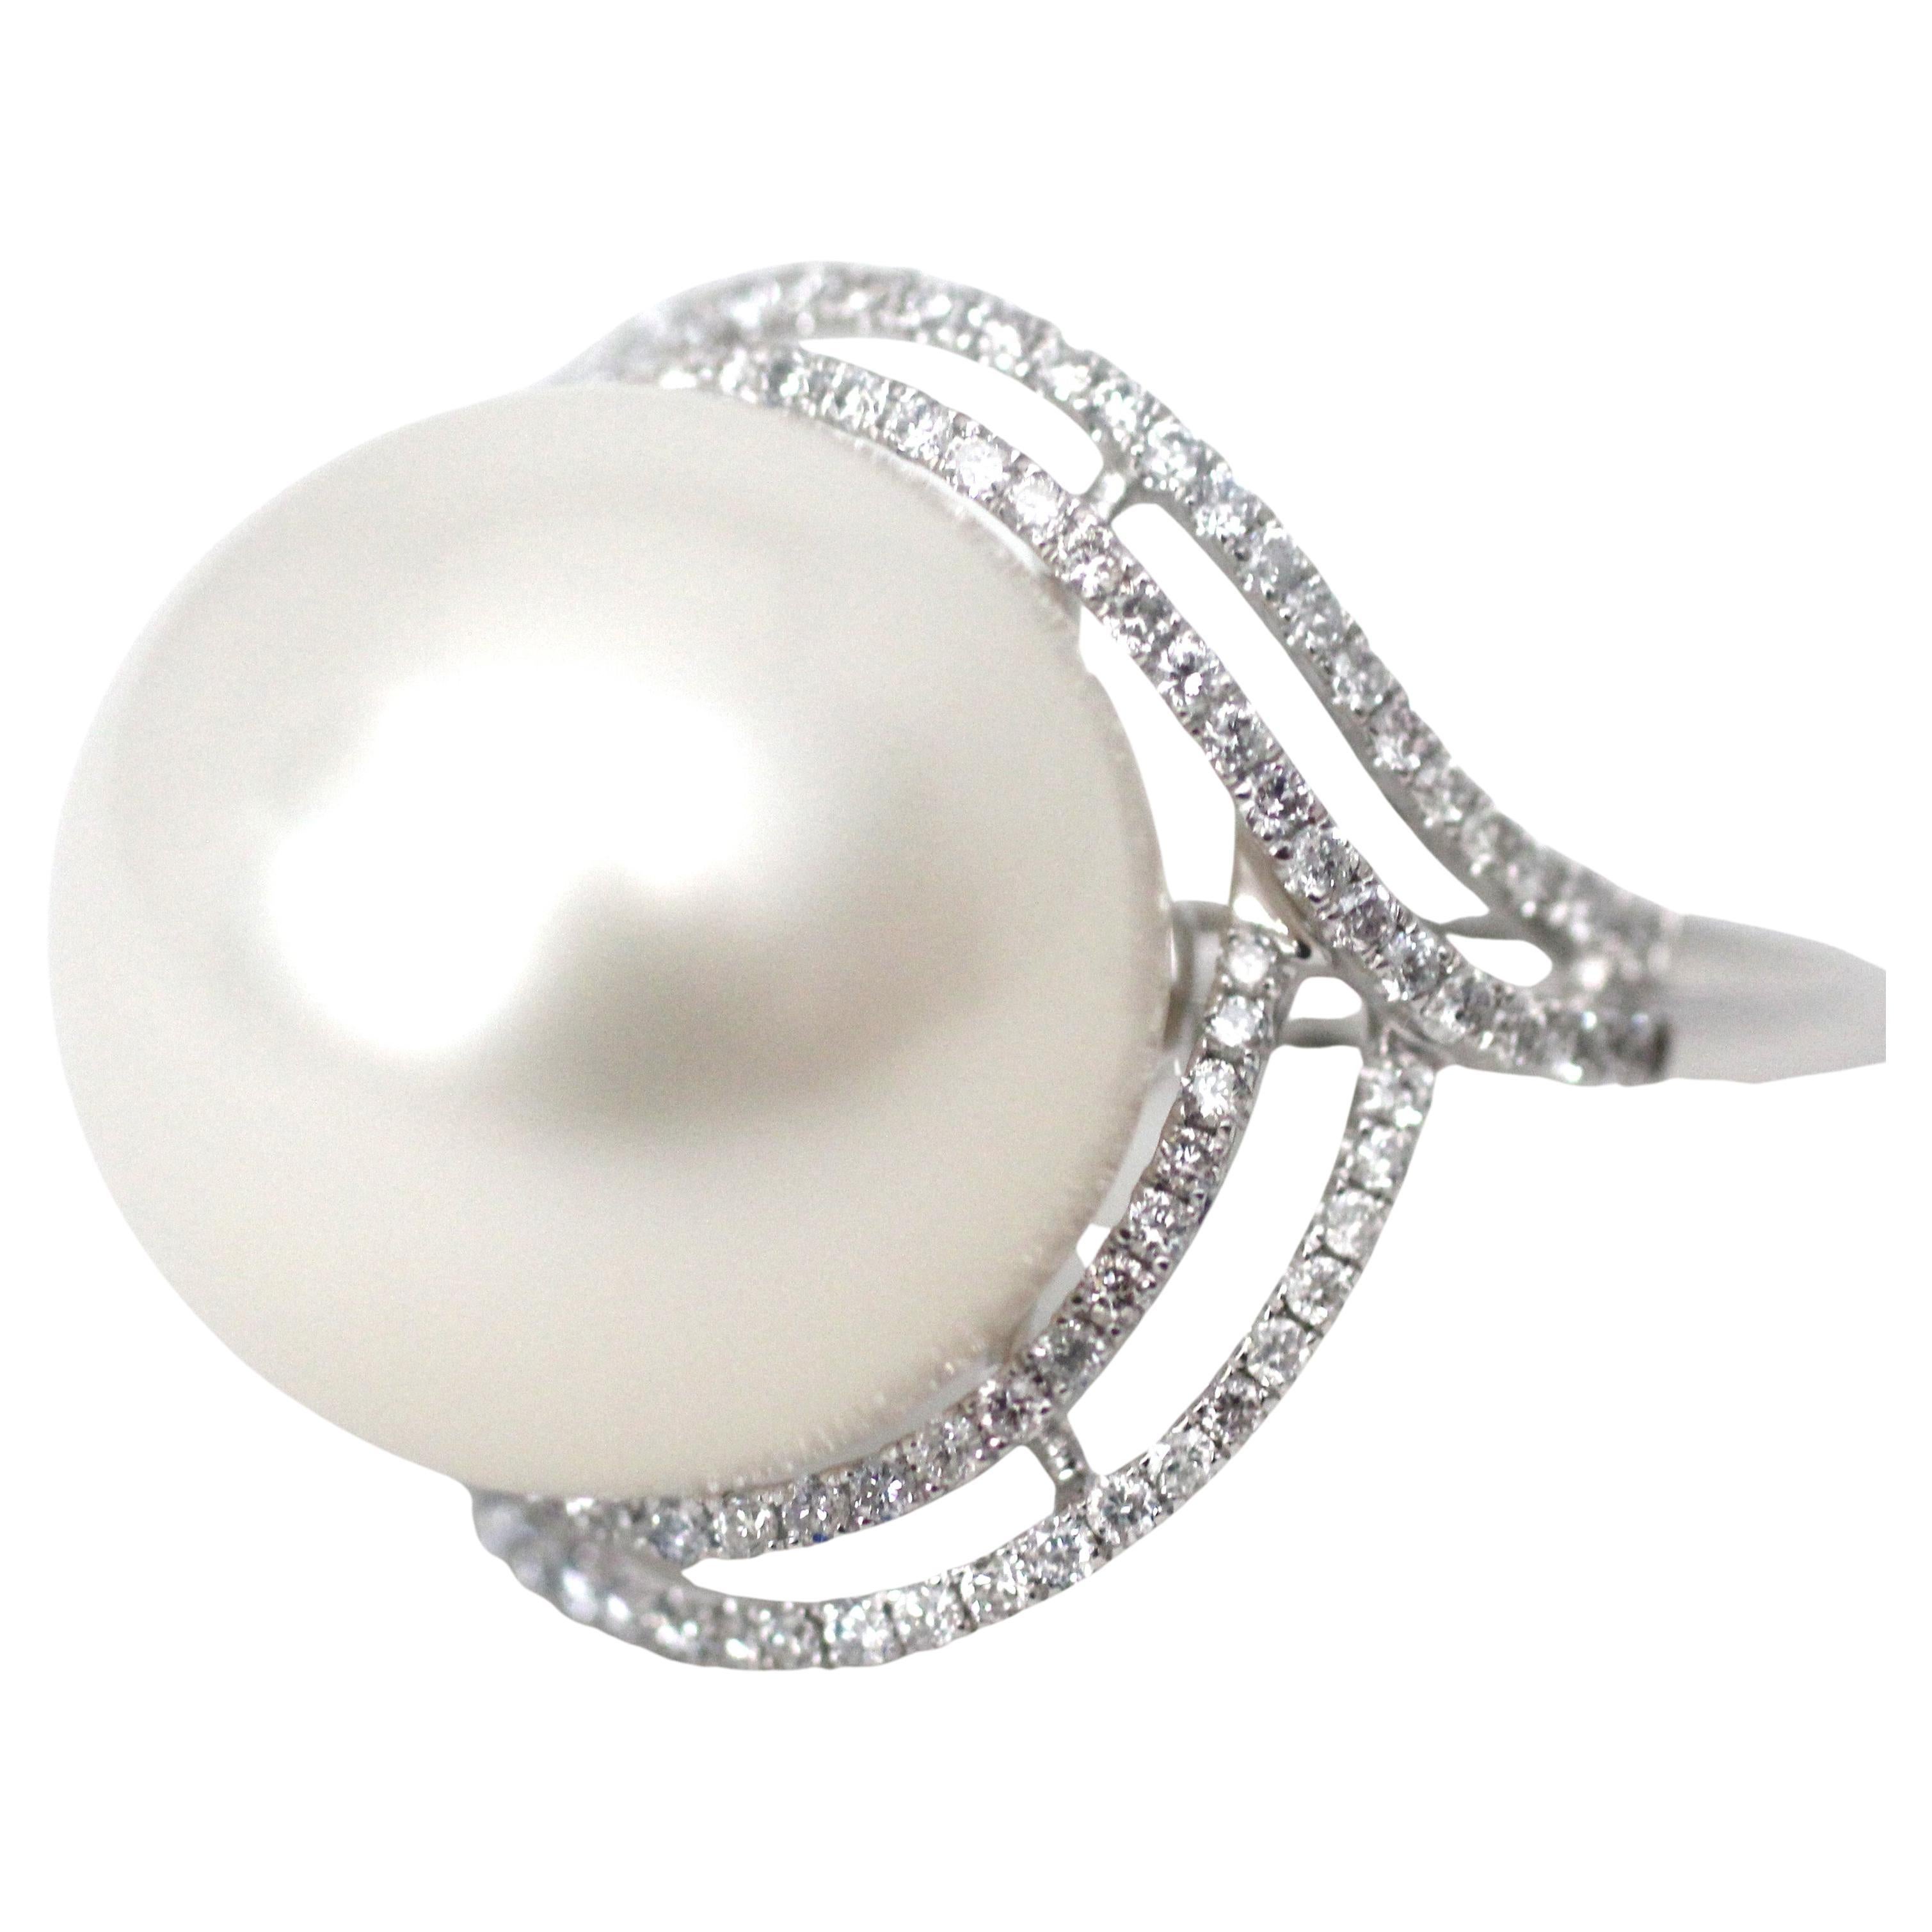 18K White Gold & Diamonds 15.8 mm South Sea Pearl Cocktail Ring